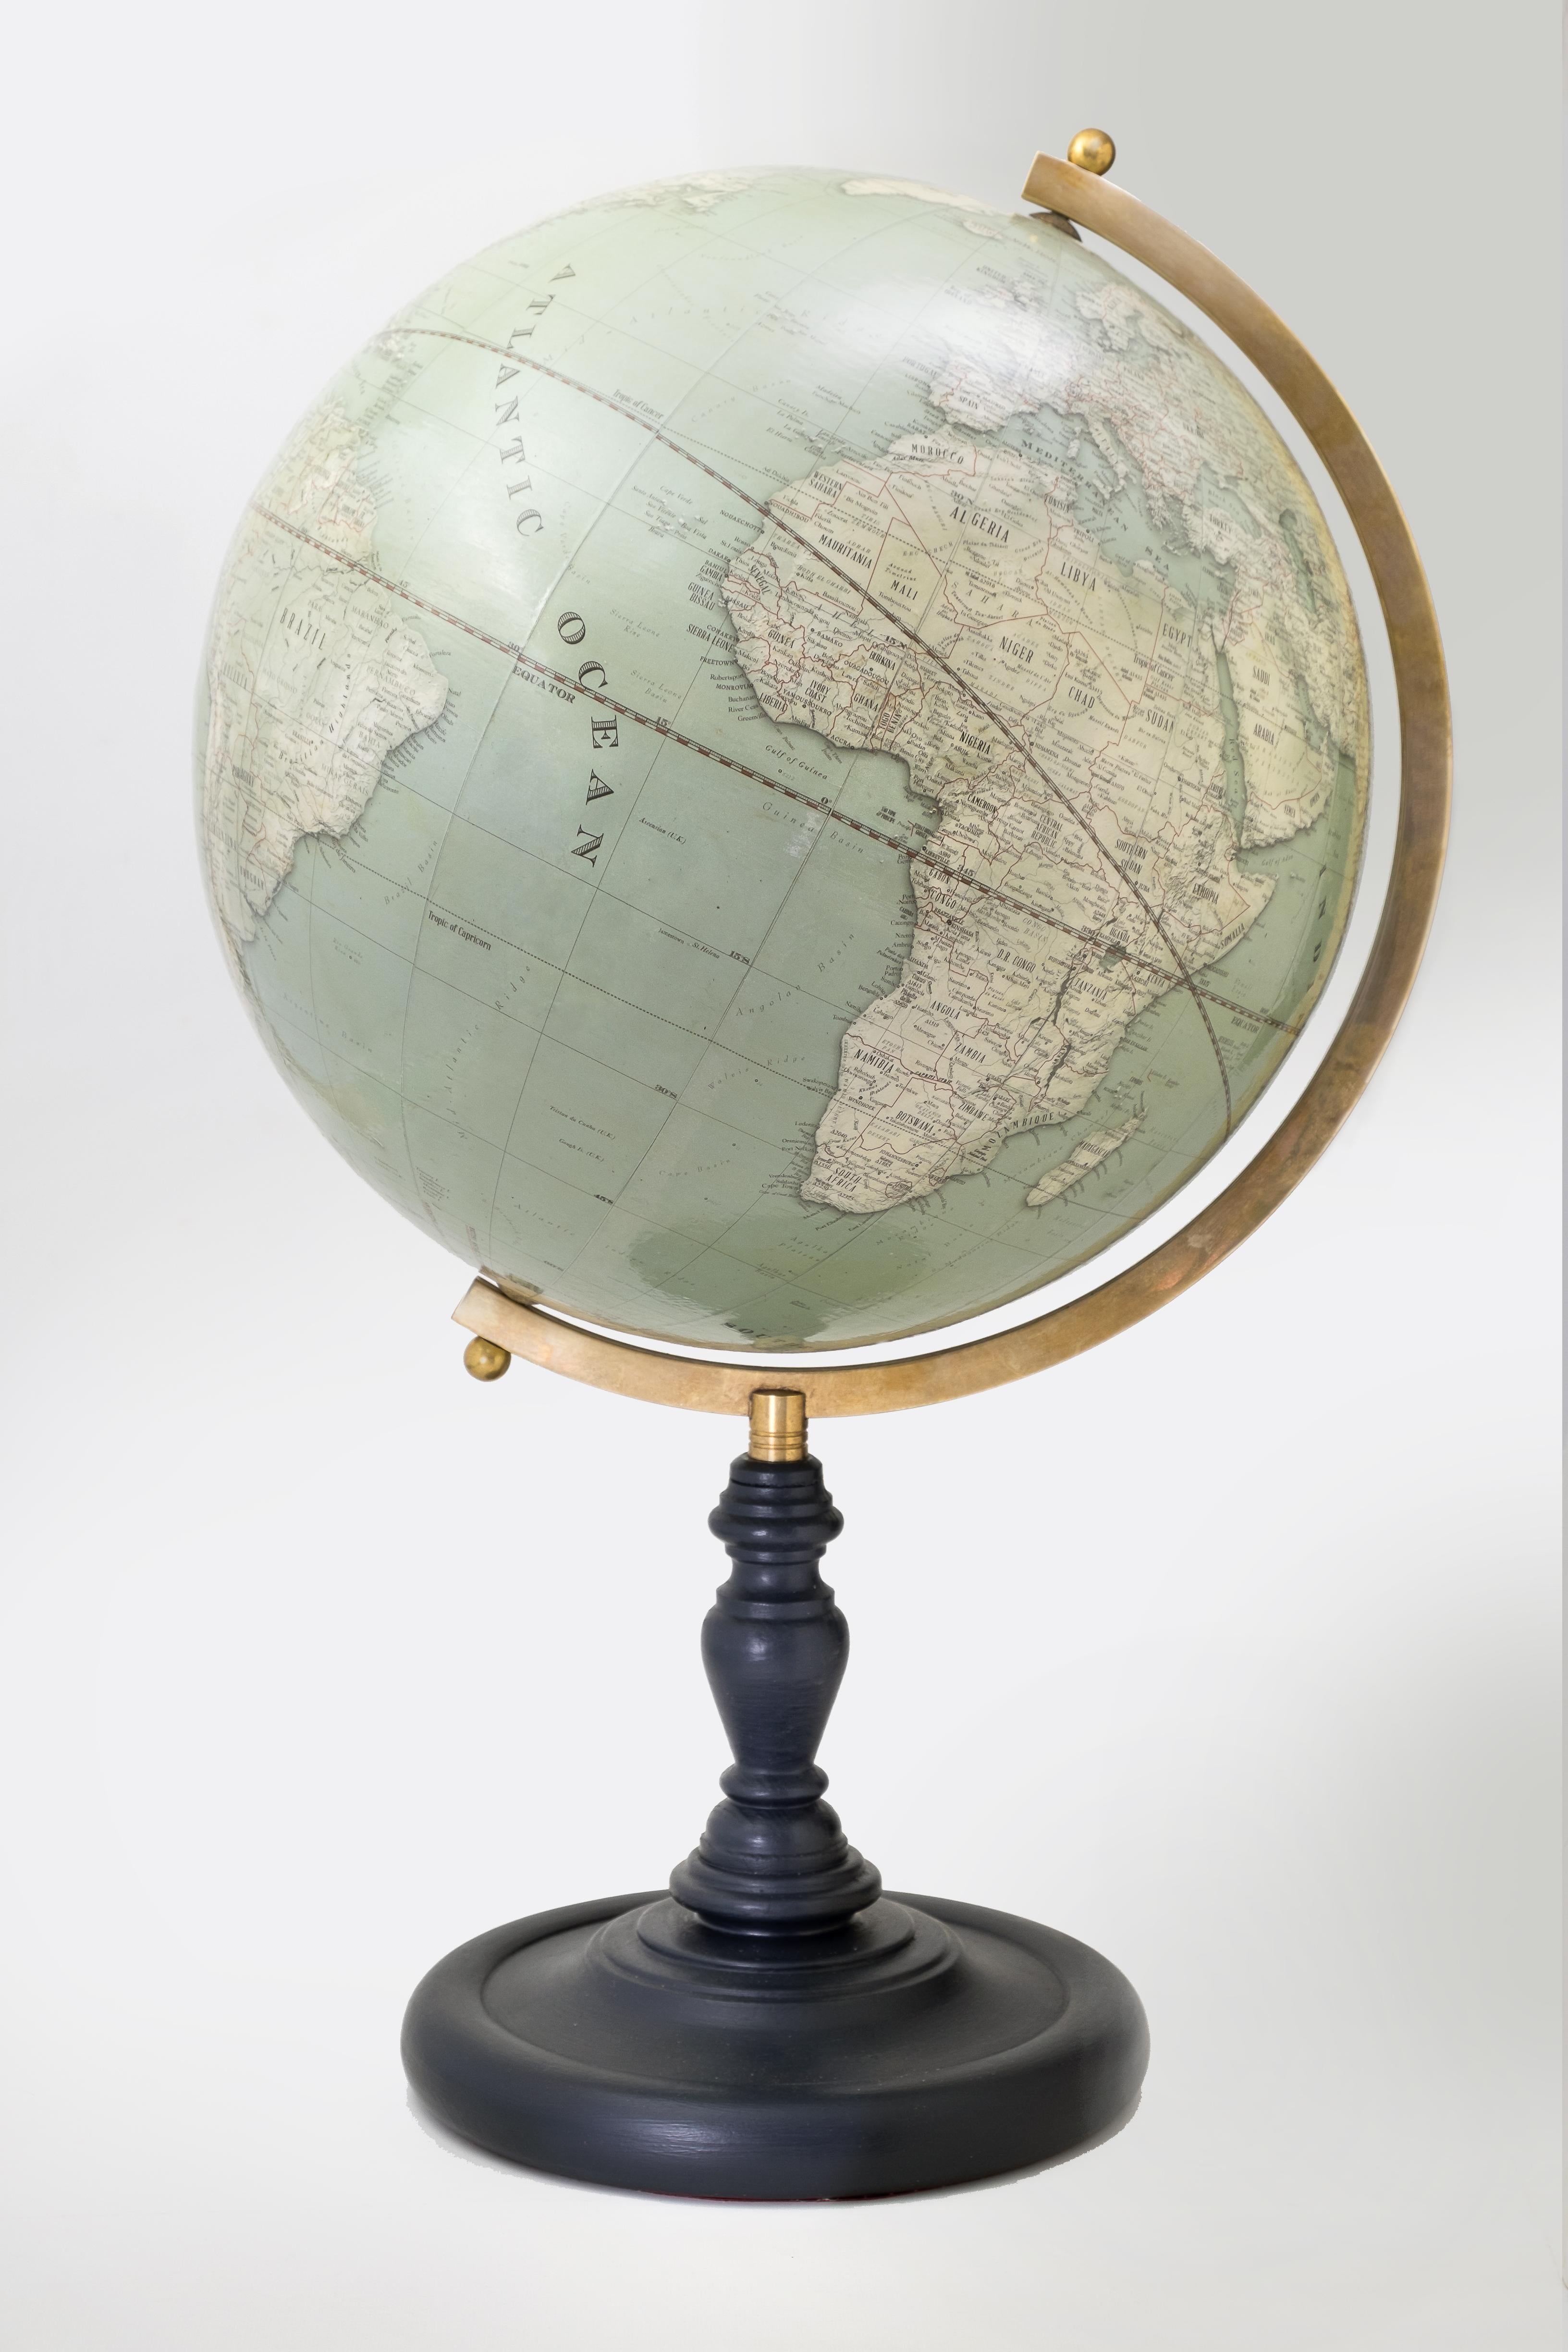 This 15 inch diameter globe shares the same cartographic detail as the contemporary version but is presented in a classic vintage style.
The cartography is constantly updated and features 2780 cities and towns, 730 islands, 610 seas/rivers/lakes and